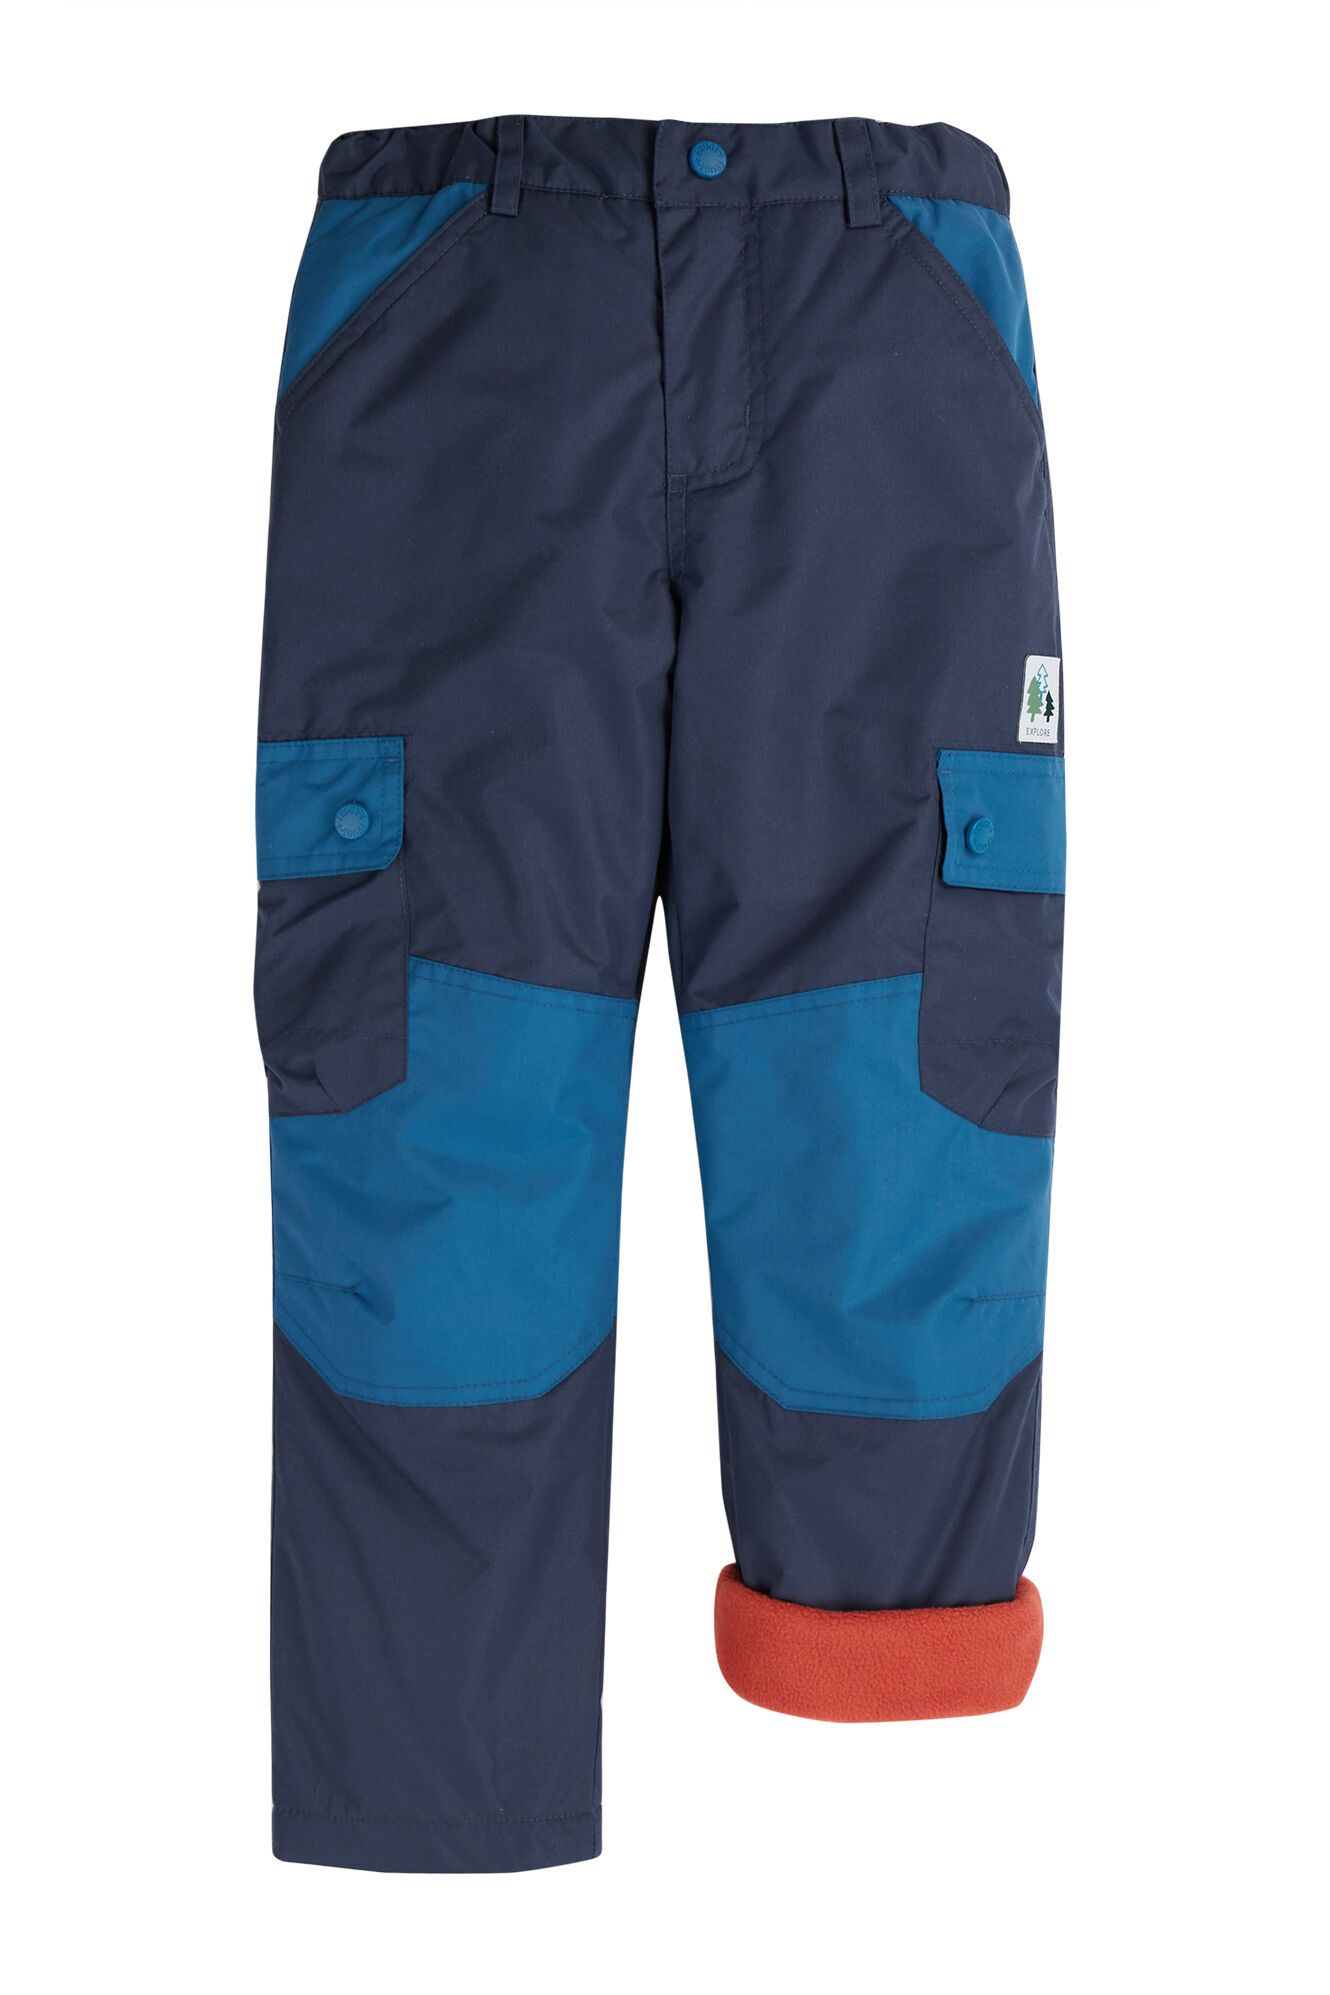 The National Trust Expedition Trousers